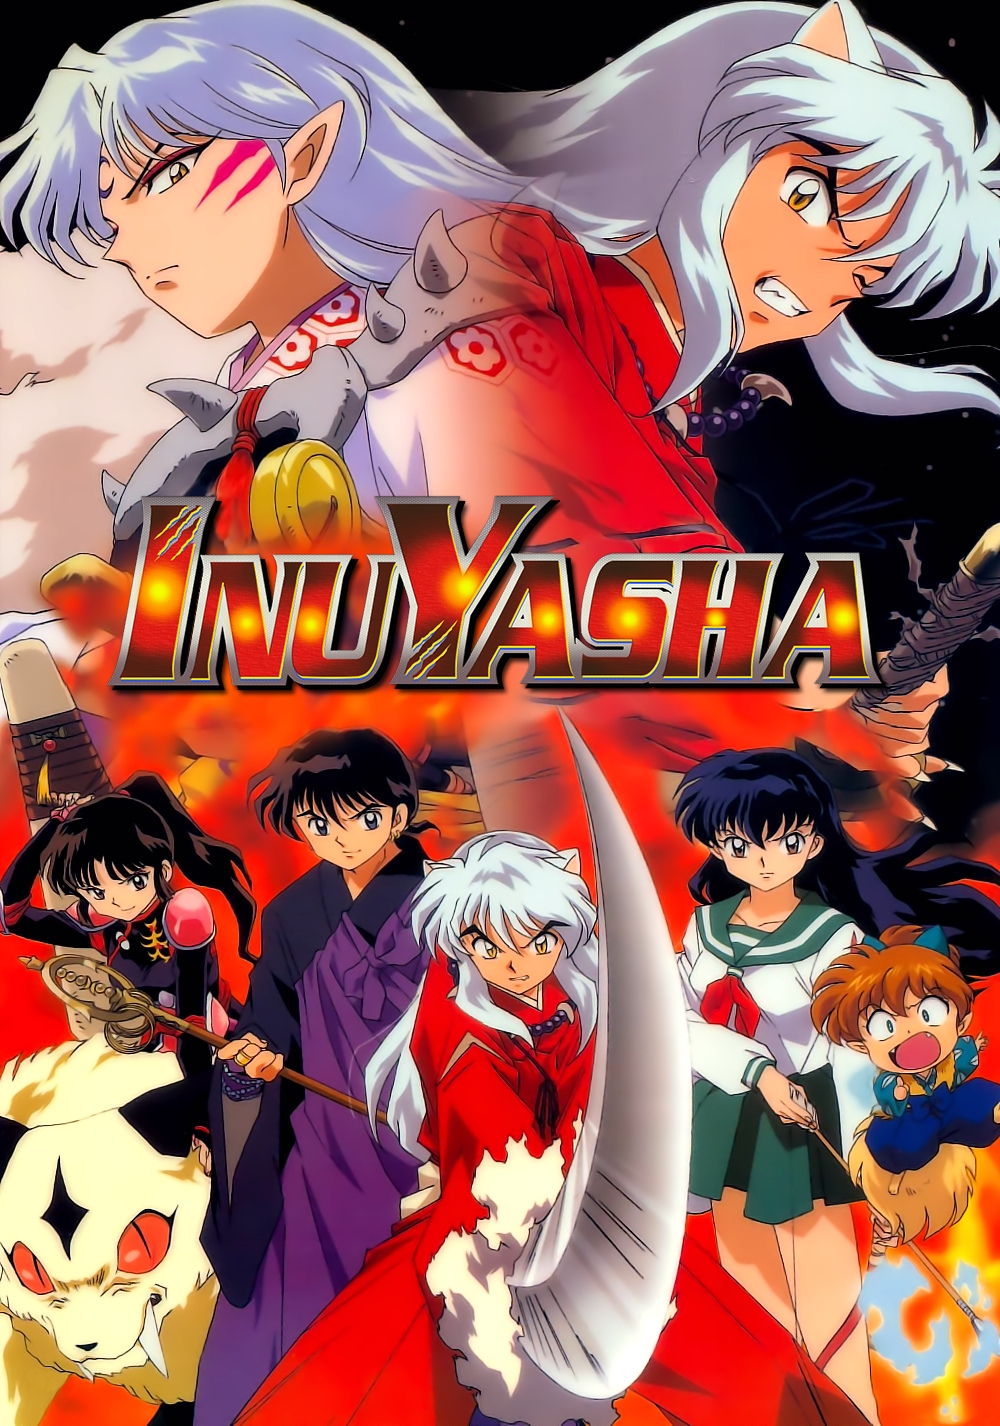 best anime of all time - Inuyasha